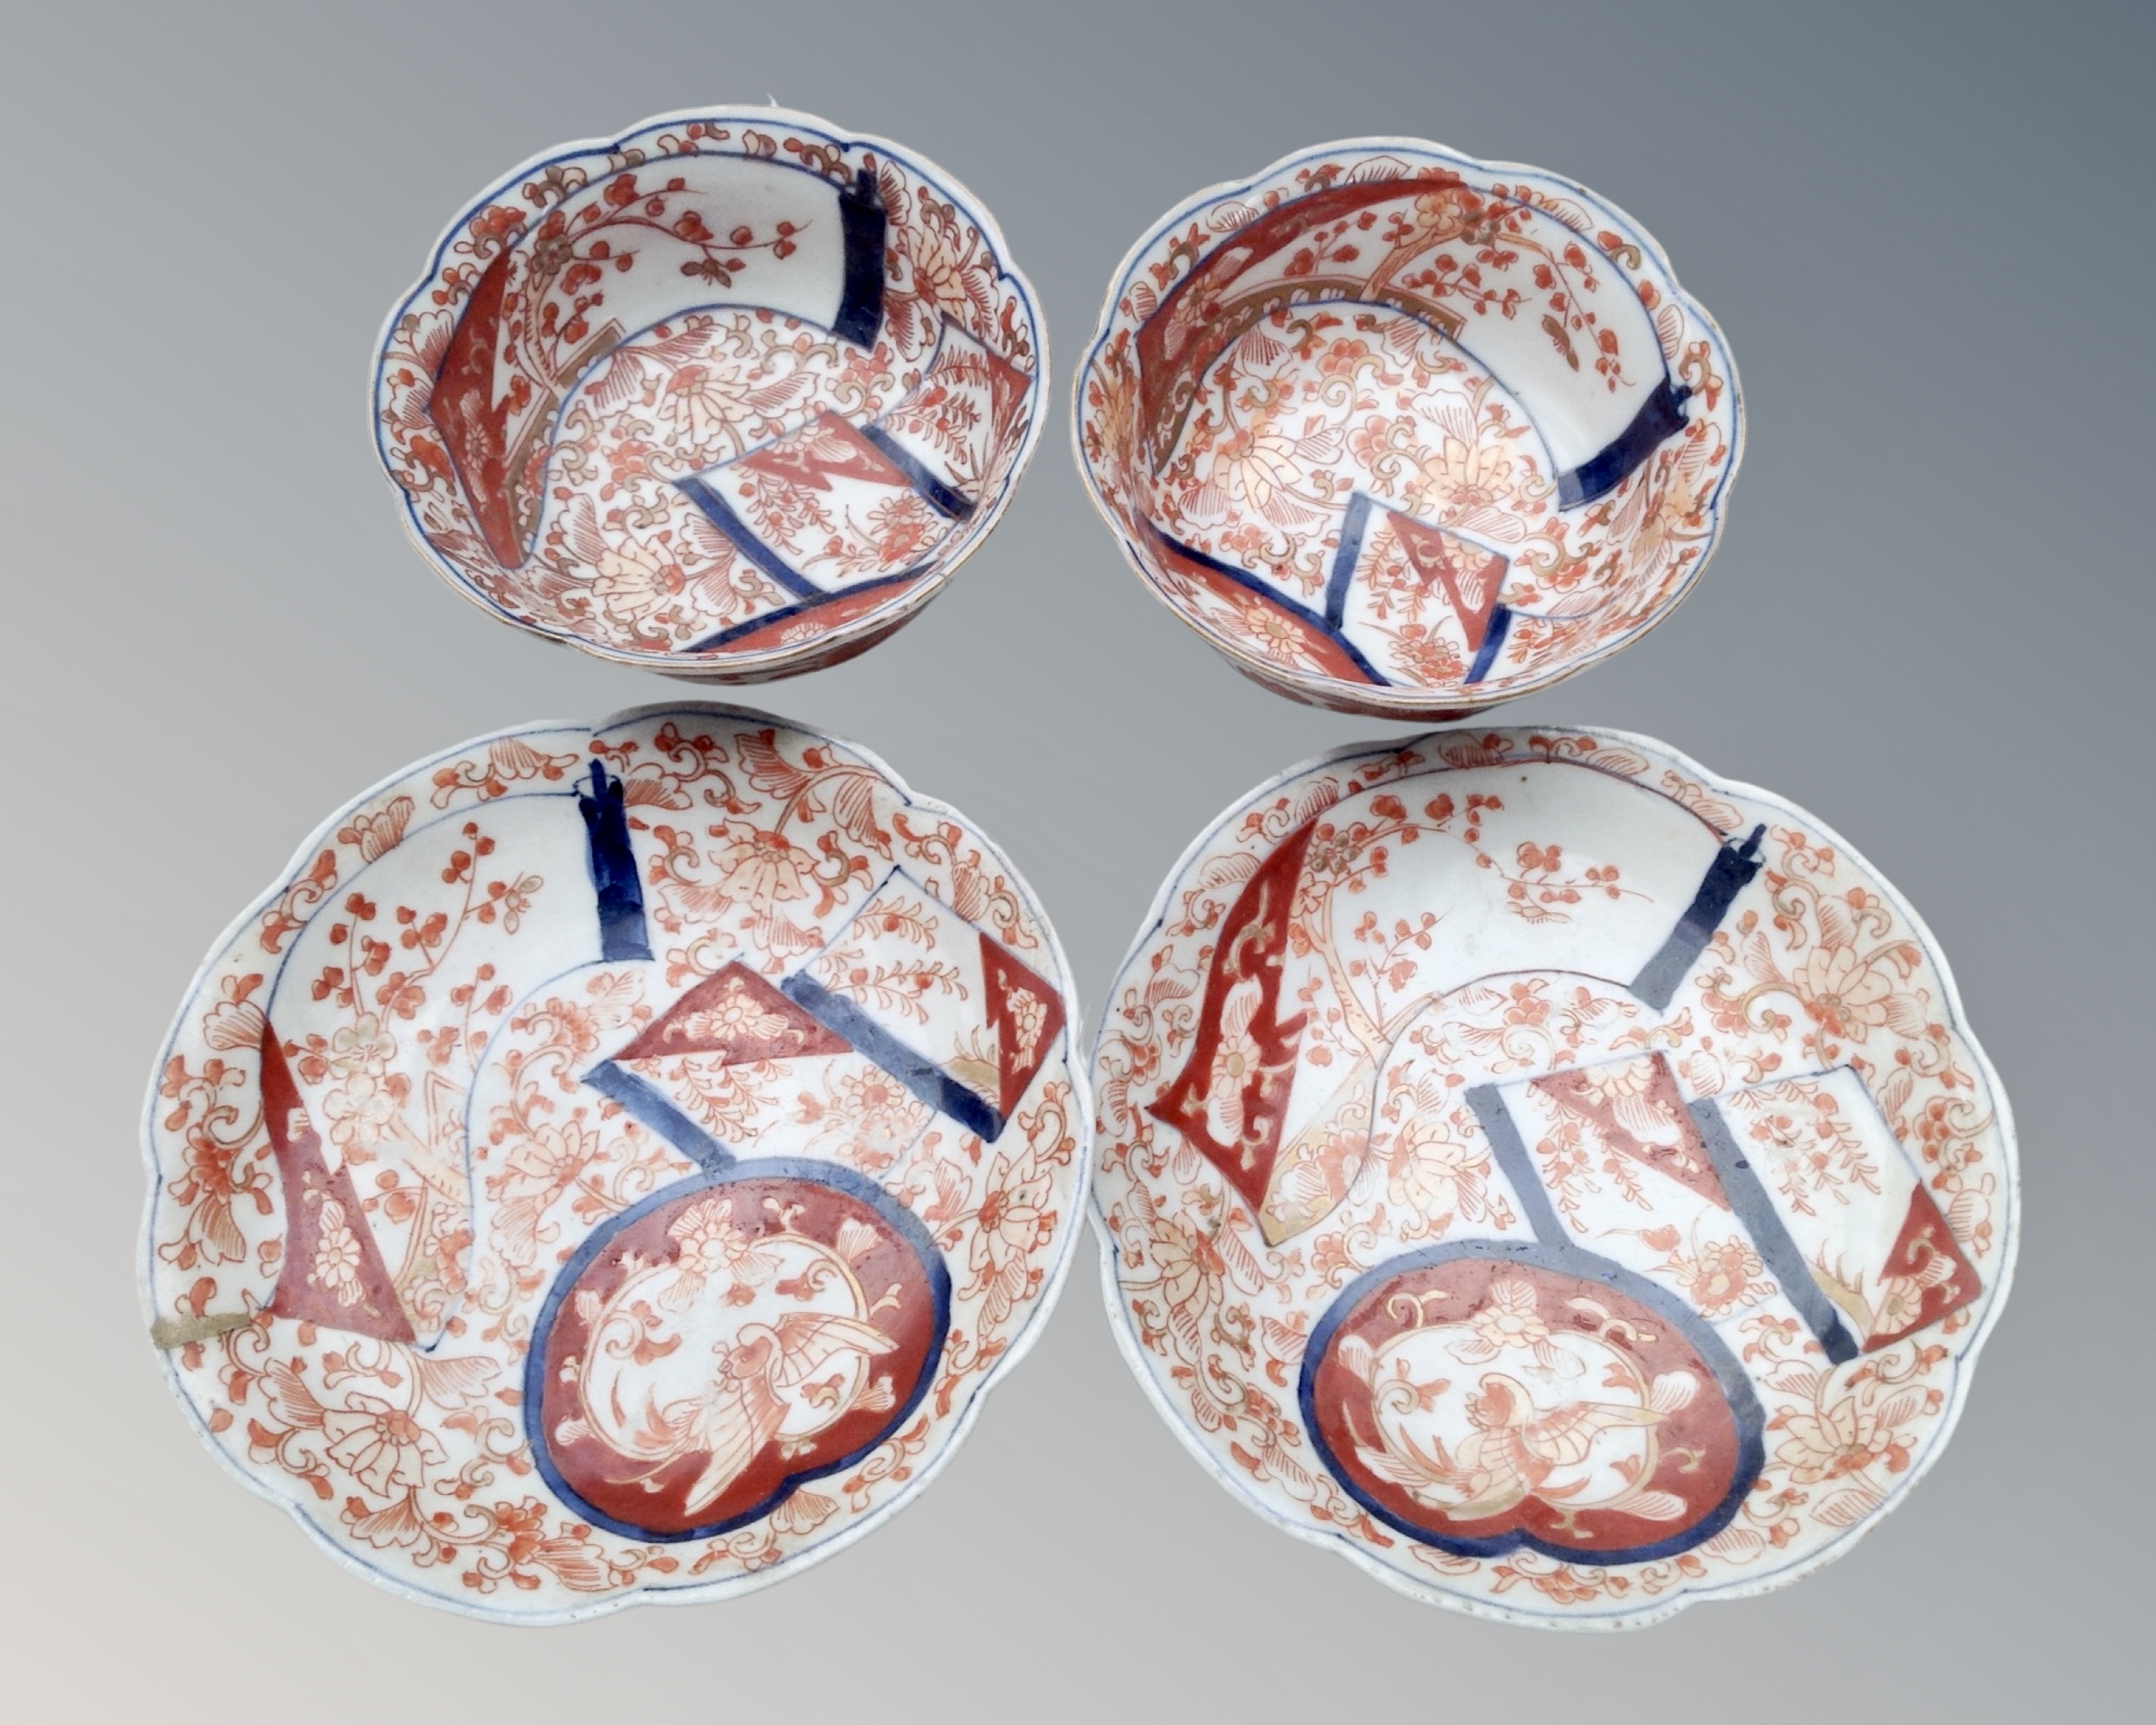 Two 19th century Japanese Imari porcelain tea bowls with saucers.